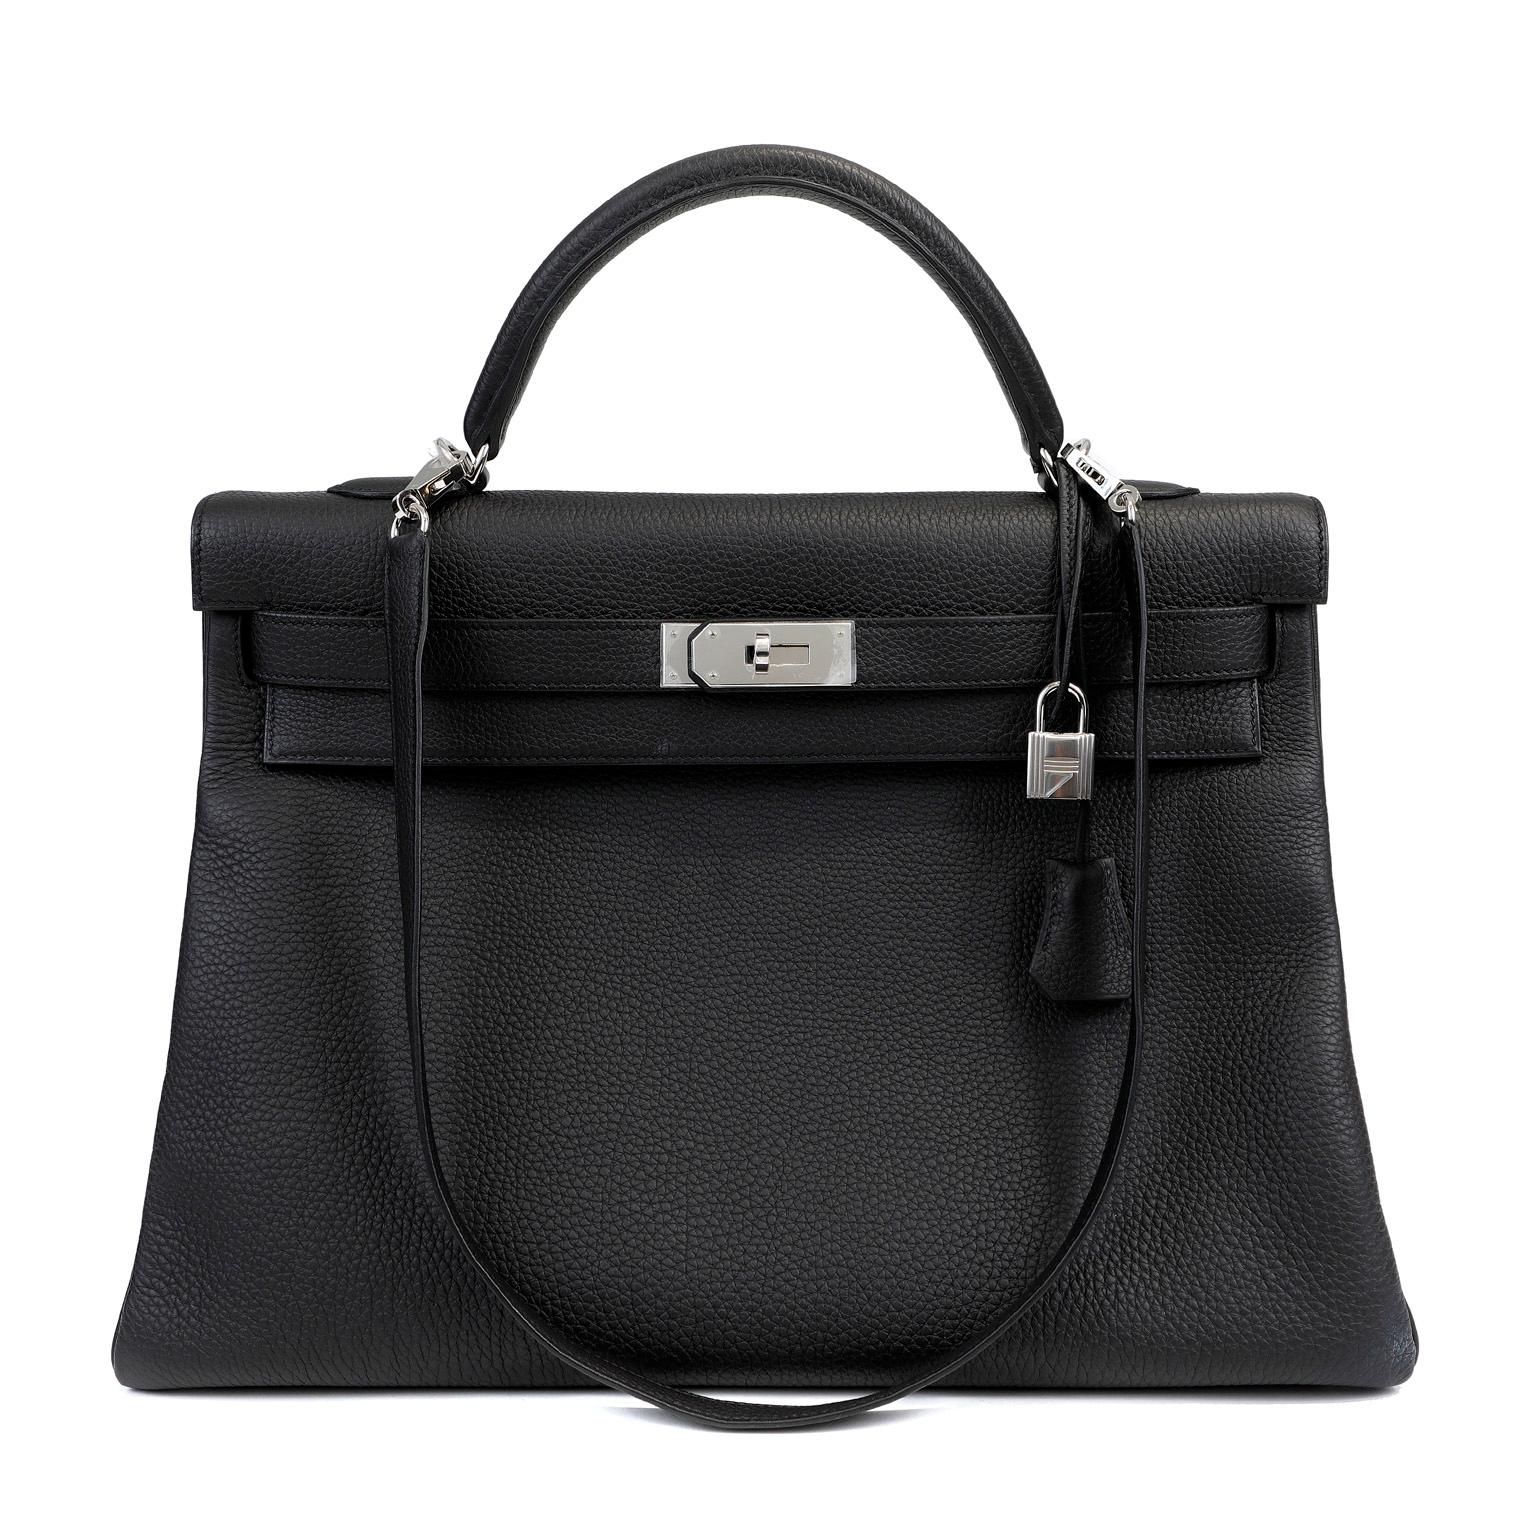 This authentic Hermès Black Togo 40 cm Kelly is in pristine condition.  The protective plastic remains intact on the hardware.   Hermès bags are considered the ultimate luxury item worldwide.  Each piece is handcrafted with waitlists that can exceed